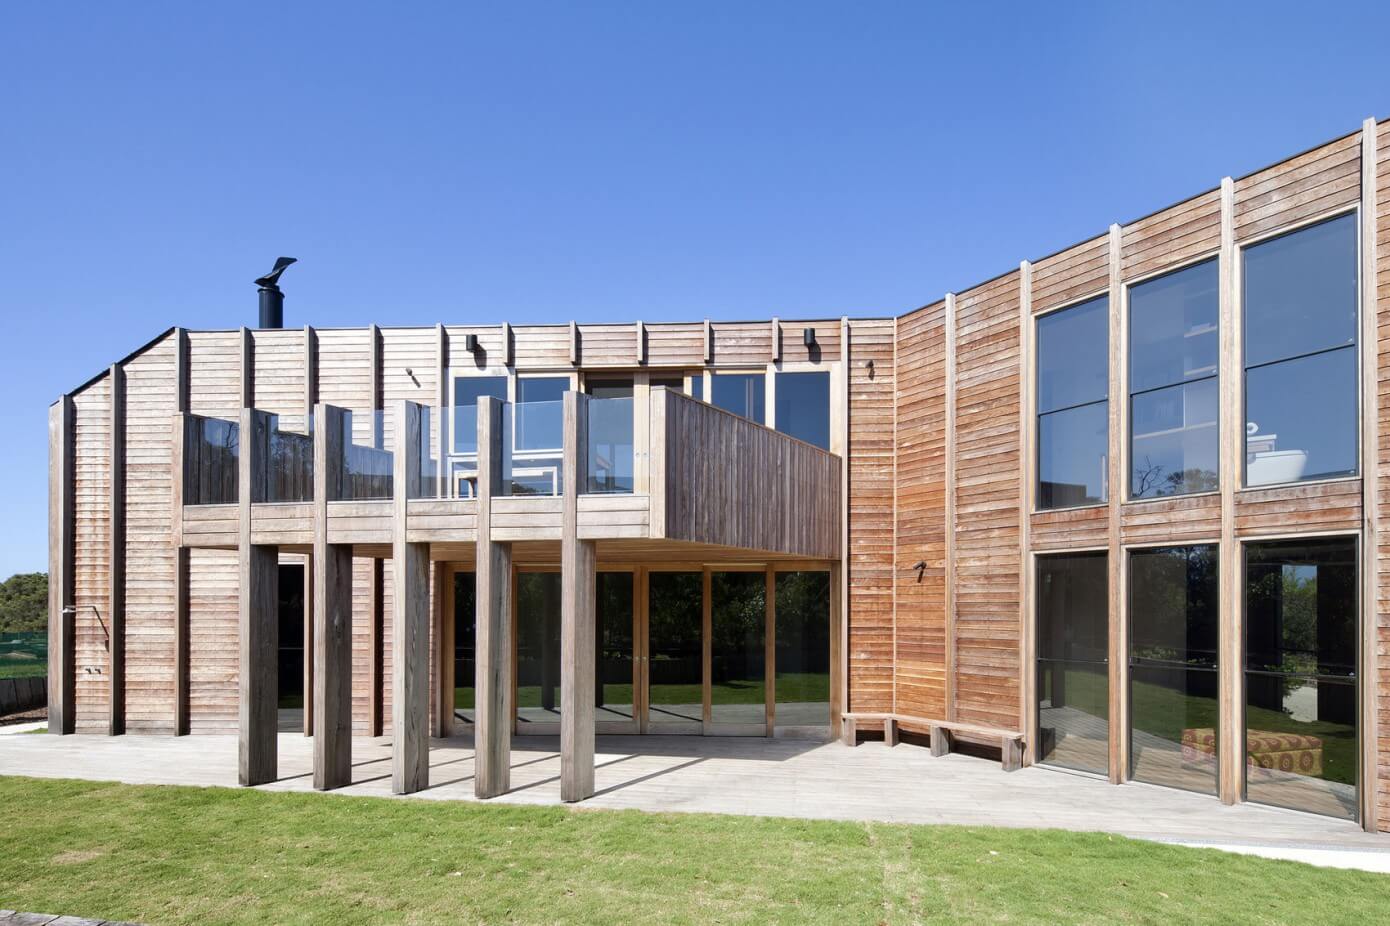 Aireys House by Byrne Architects